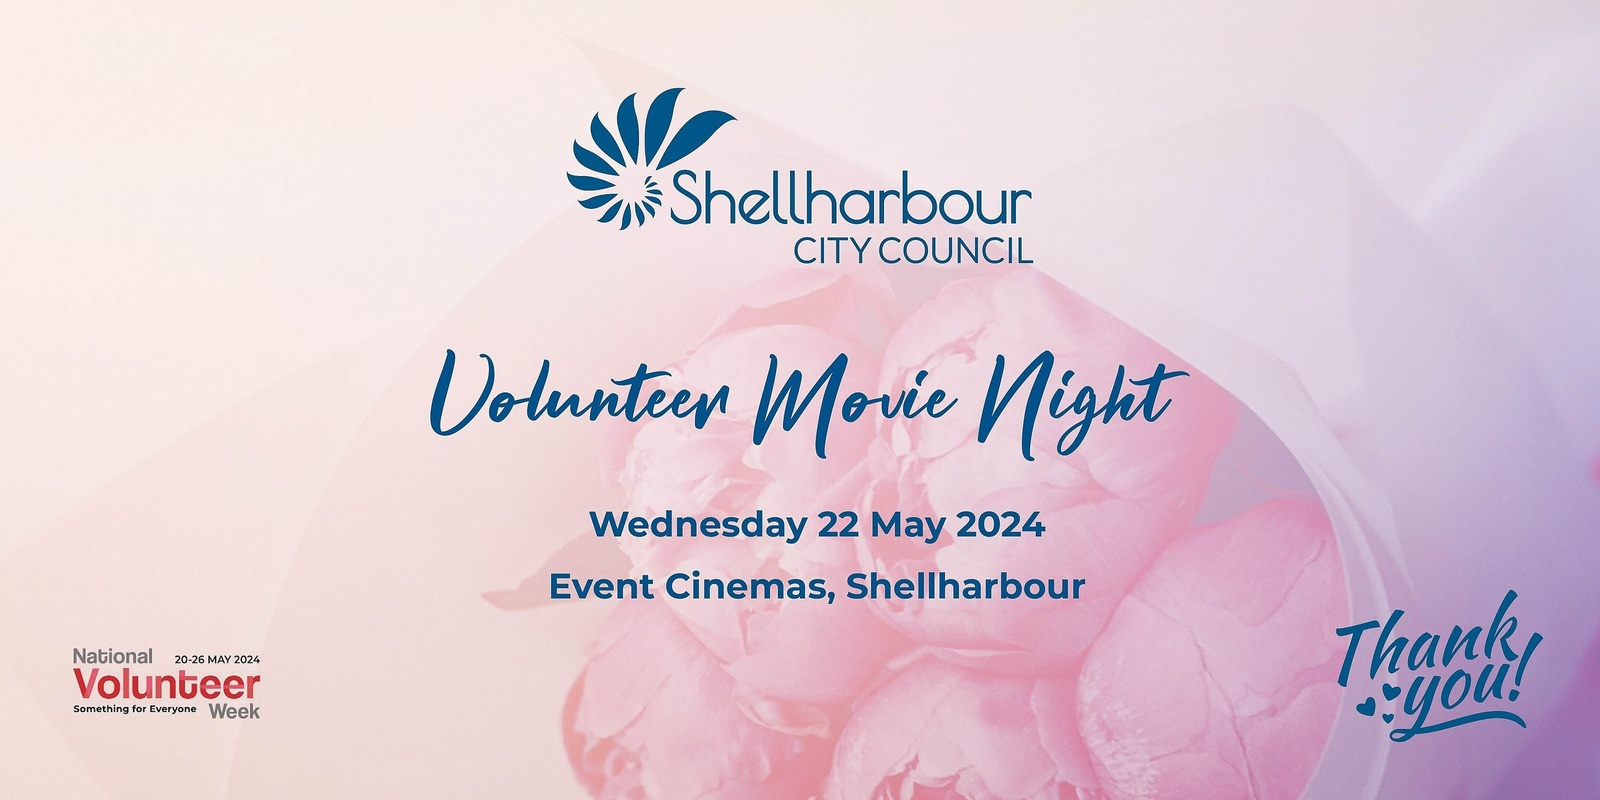 Banner image for Shellharbour City Council's Volunteer Movie Night 